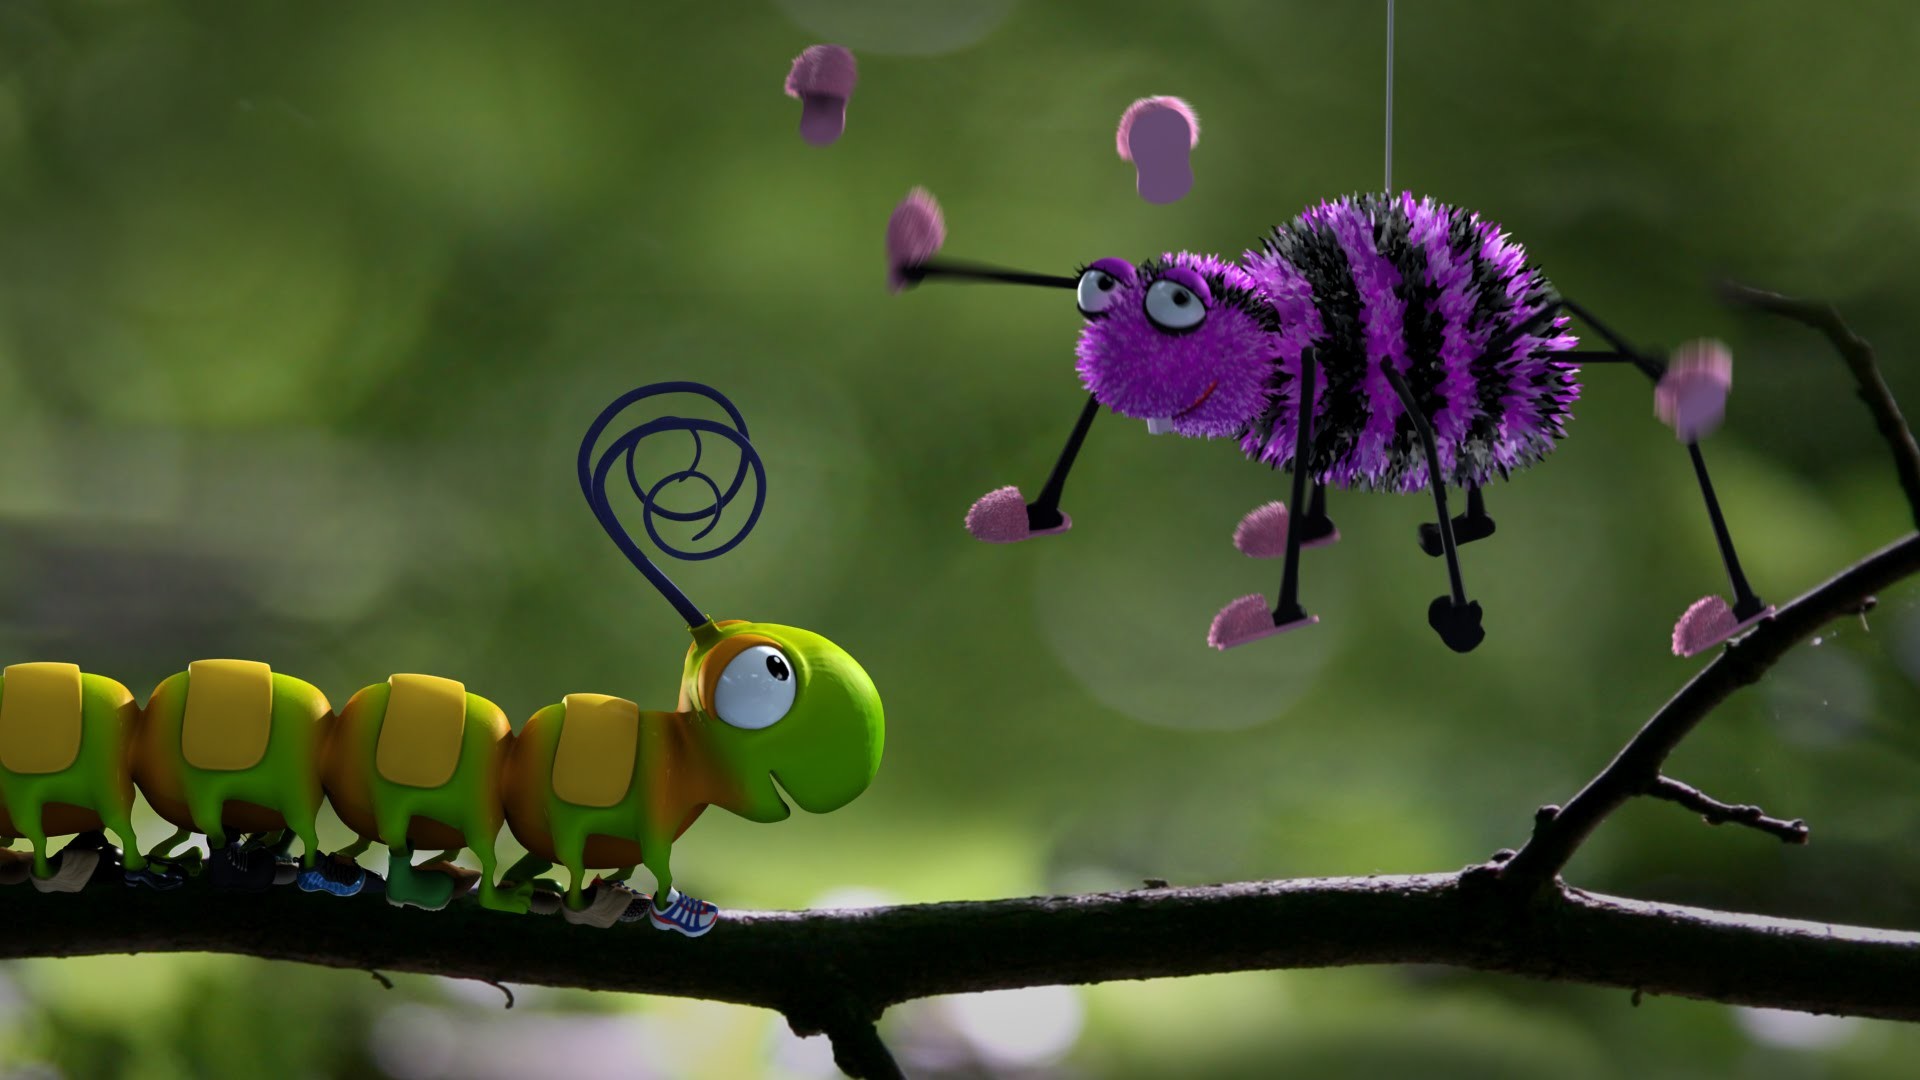 1920x1080 Caterpillar Shoes - Fun Insect Animation - Kids' Bedtime Story - Nursery  Rhyme - YouTube